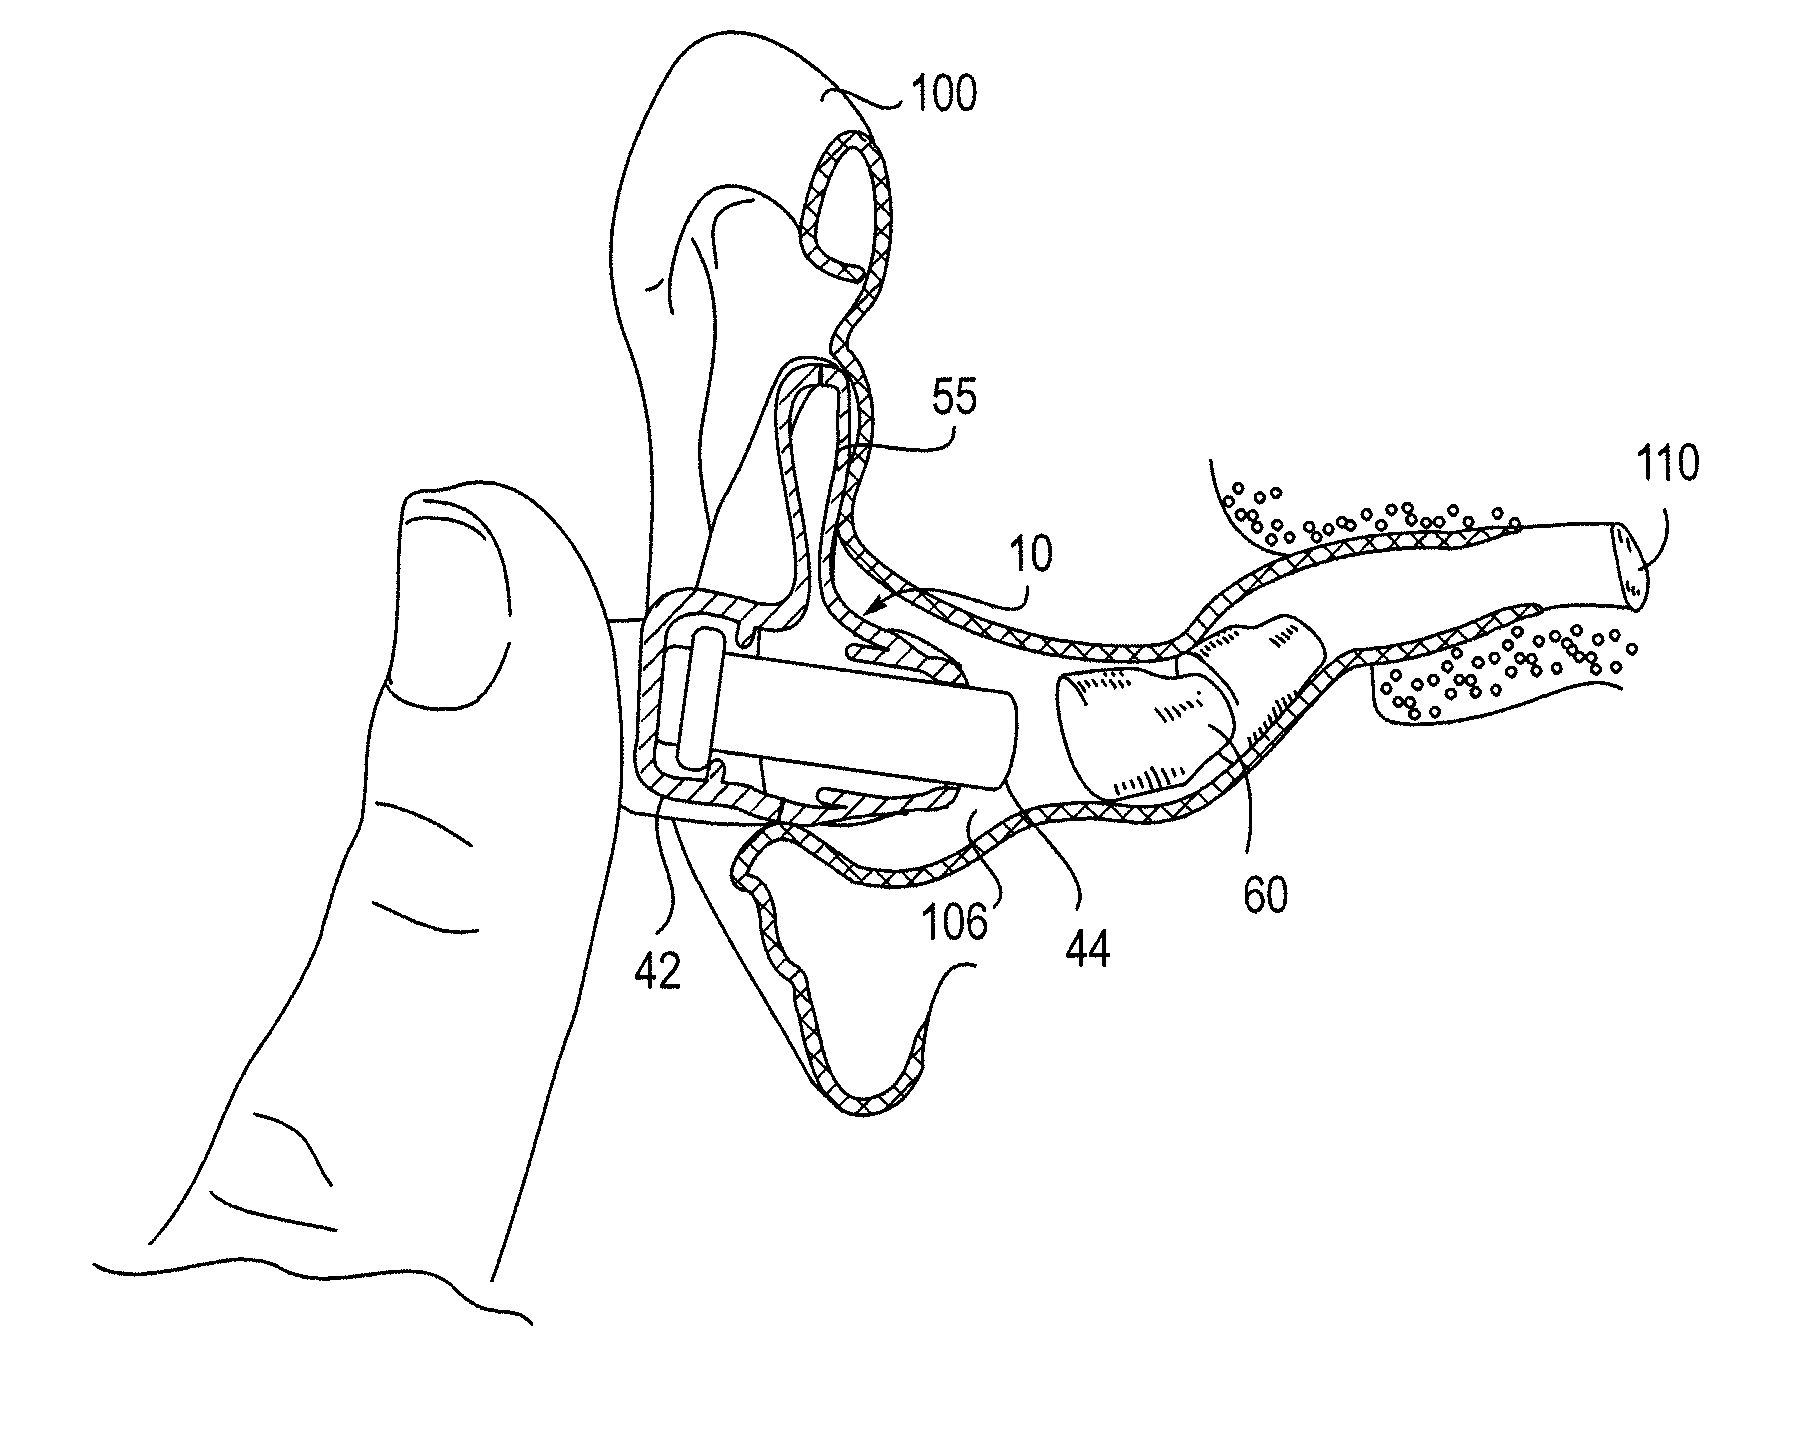 Insertion device for deep-in-the-canal hearing devices